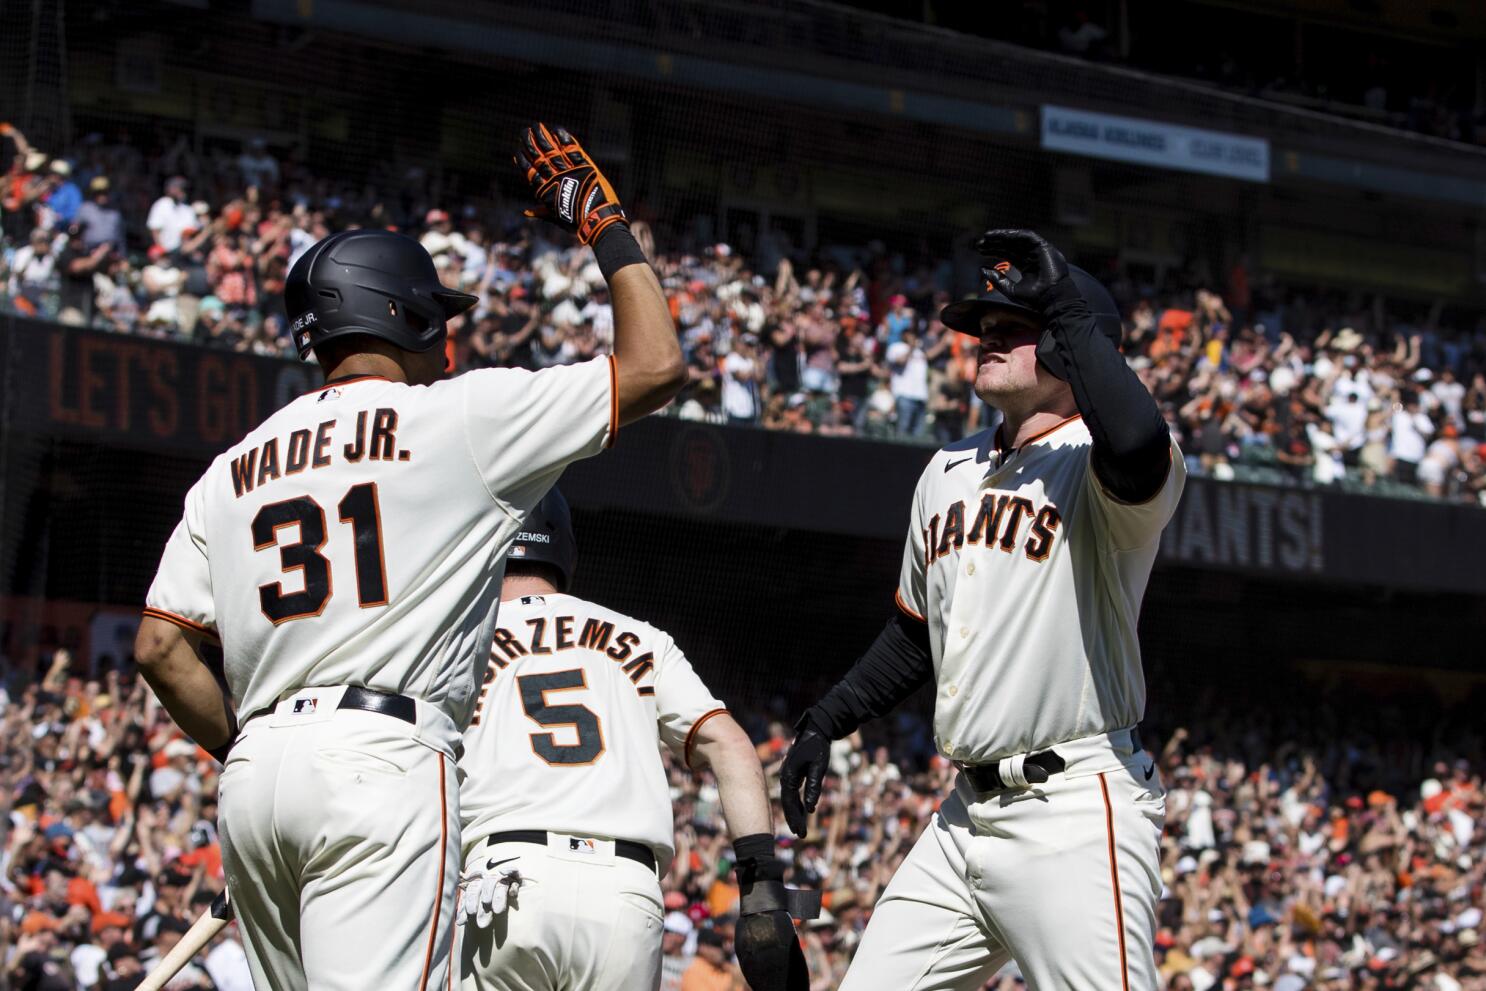 Brandon Crawford closes out SF Giants bullpen game in rout of Cubs